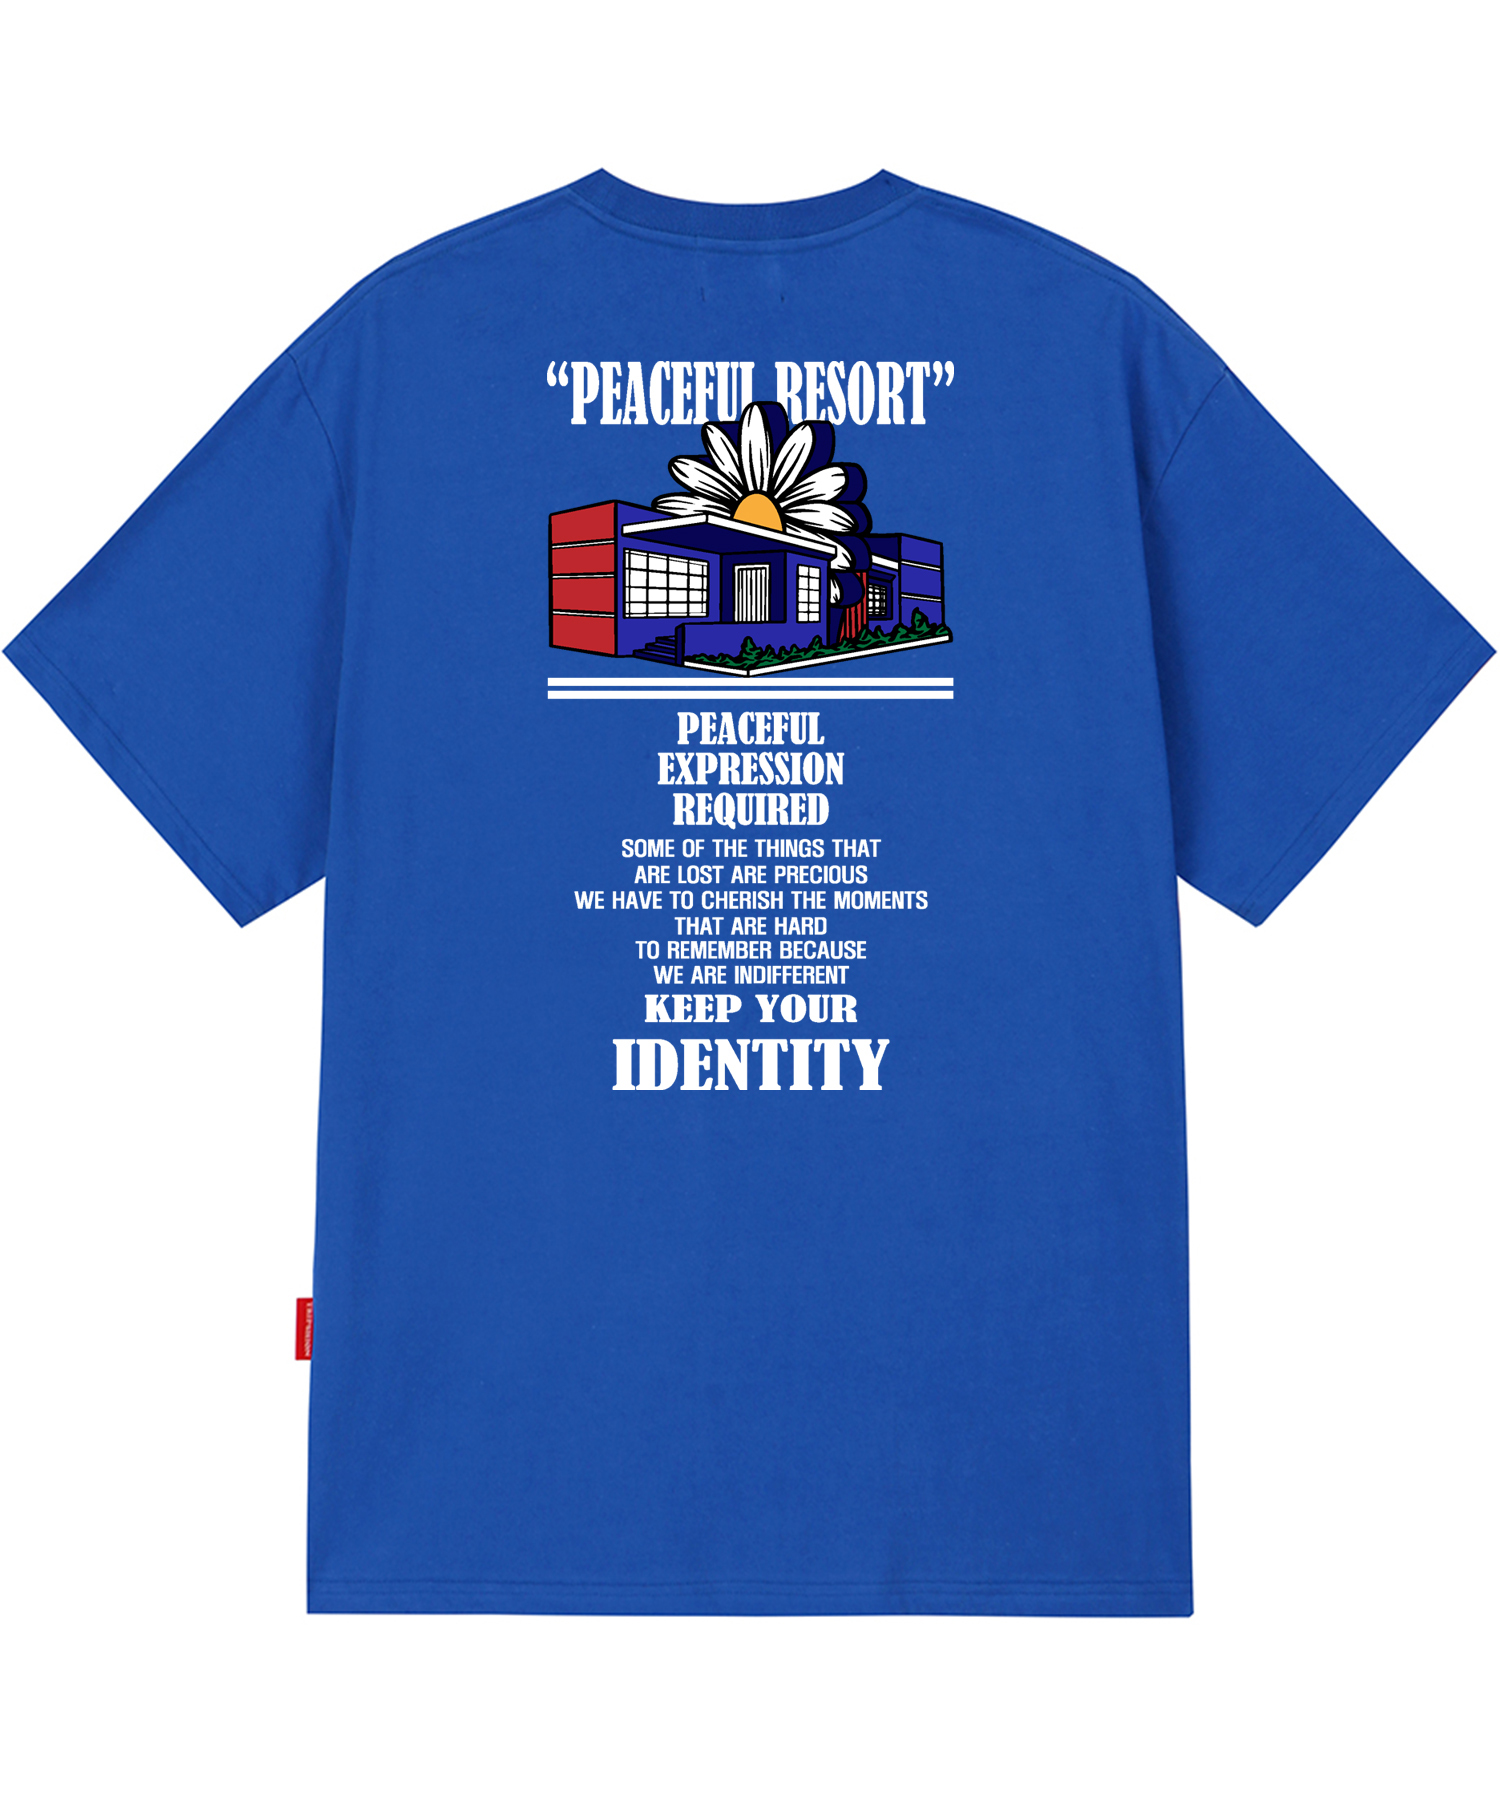 PEACEFUL RESORT GRAPHIC T-SHIRTS - BLUE